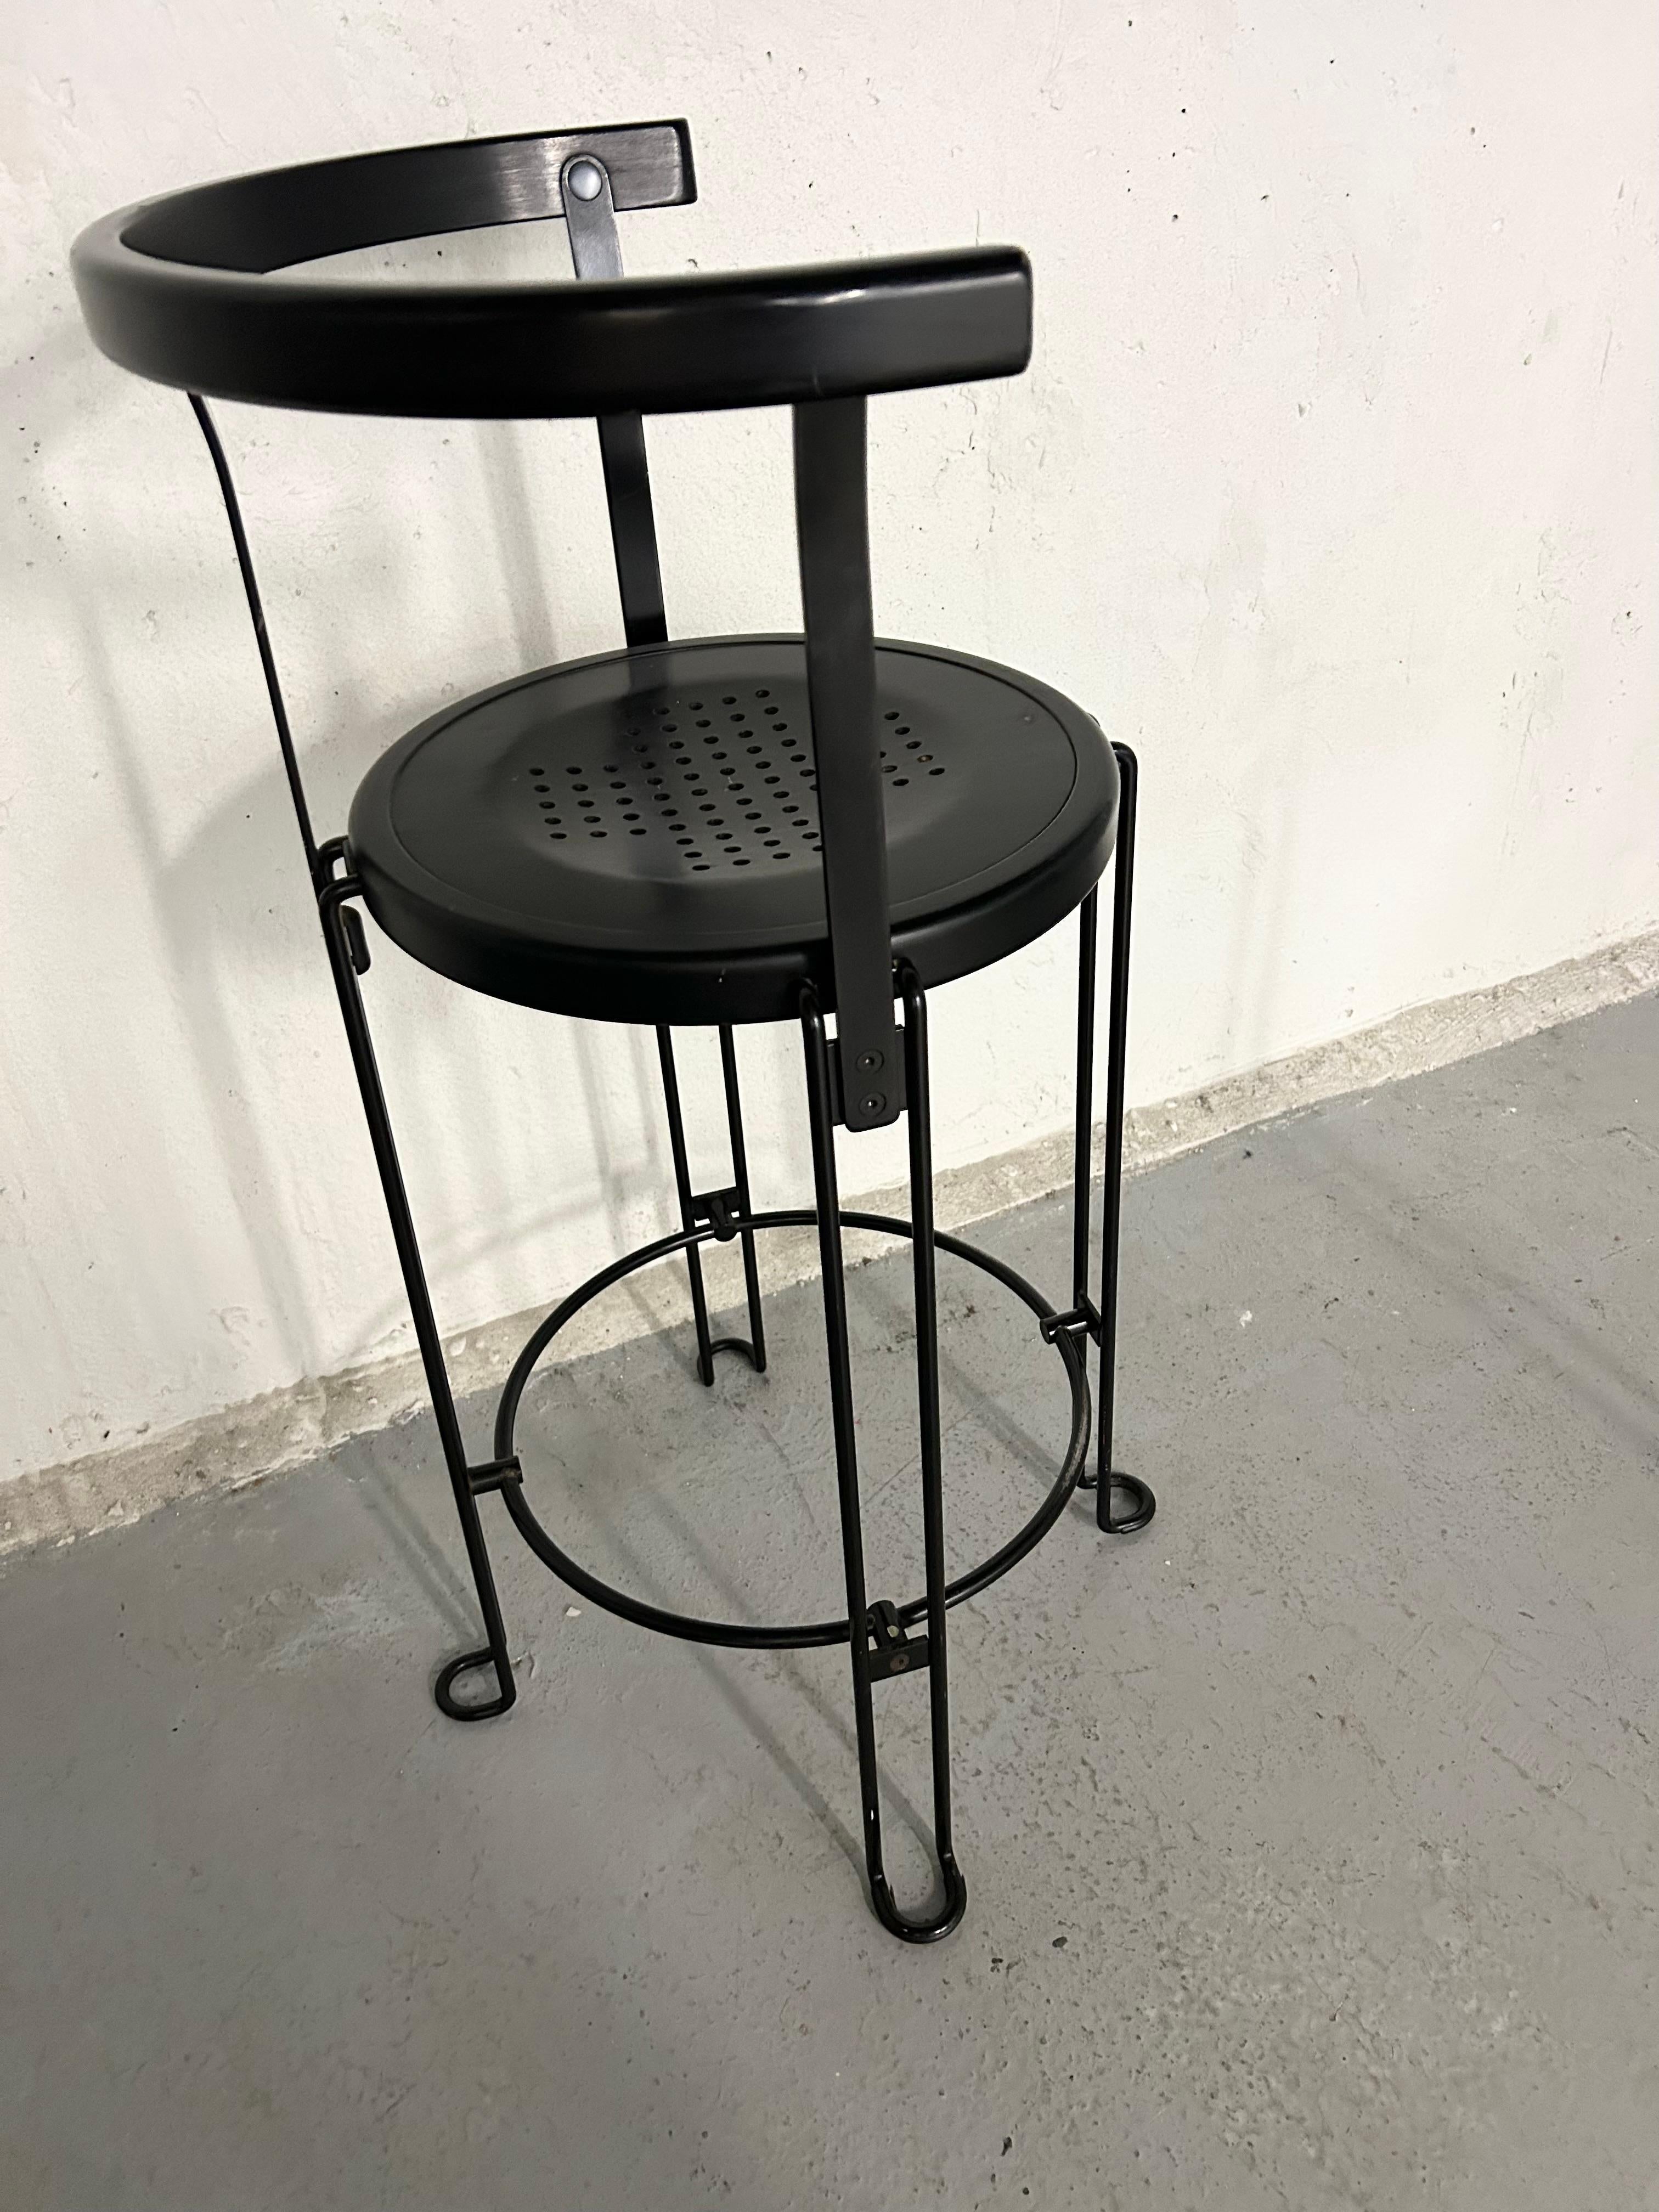 Borge Lindau for Bla Station Sweden, 1986 B4-65 Counter Height Stool 4